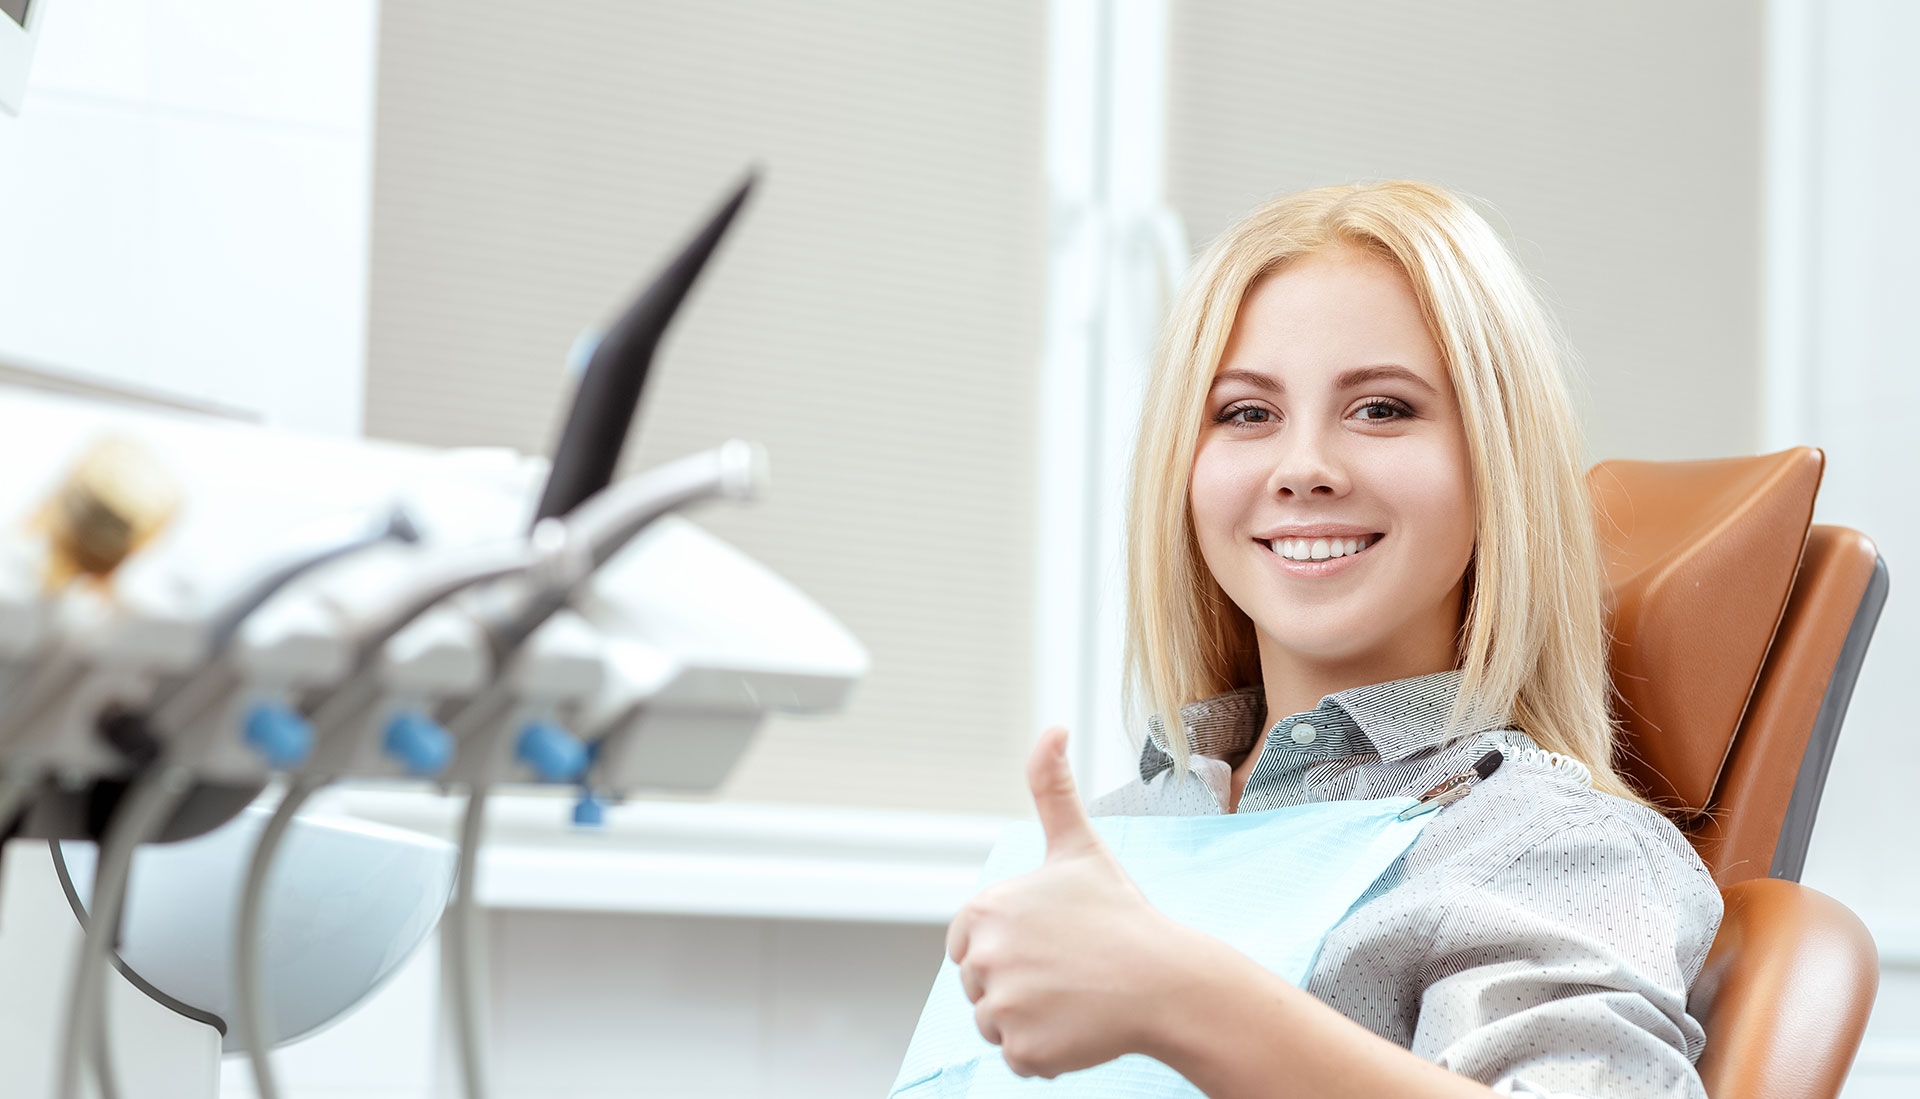 A woman in a dental chair, smiling and giving a thumbs-up.